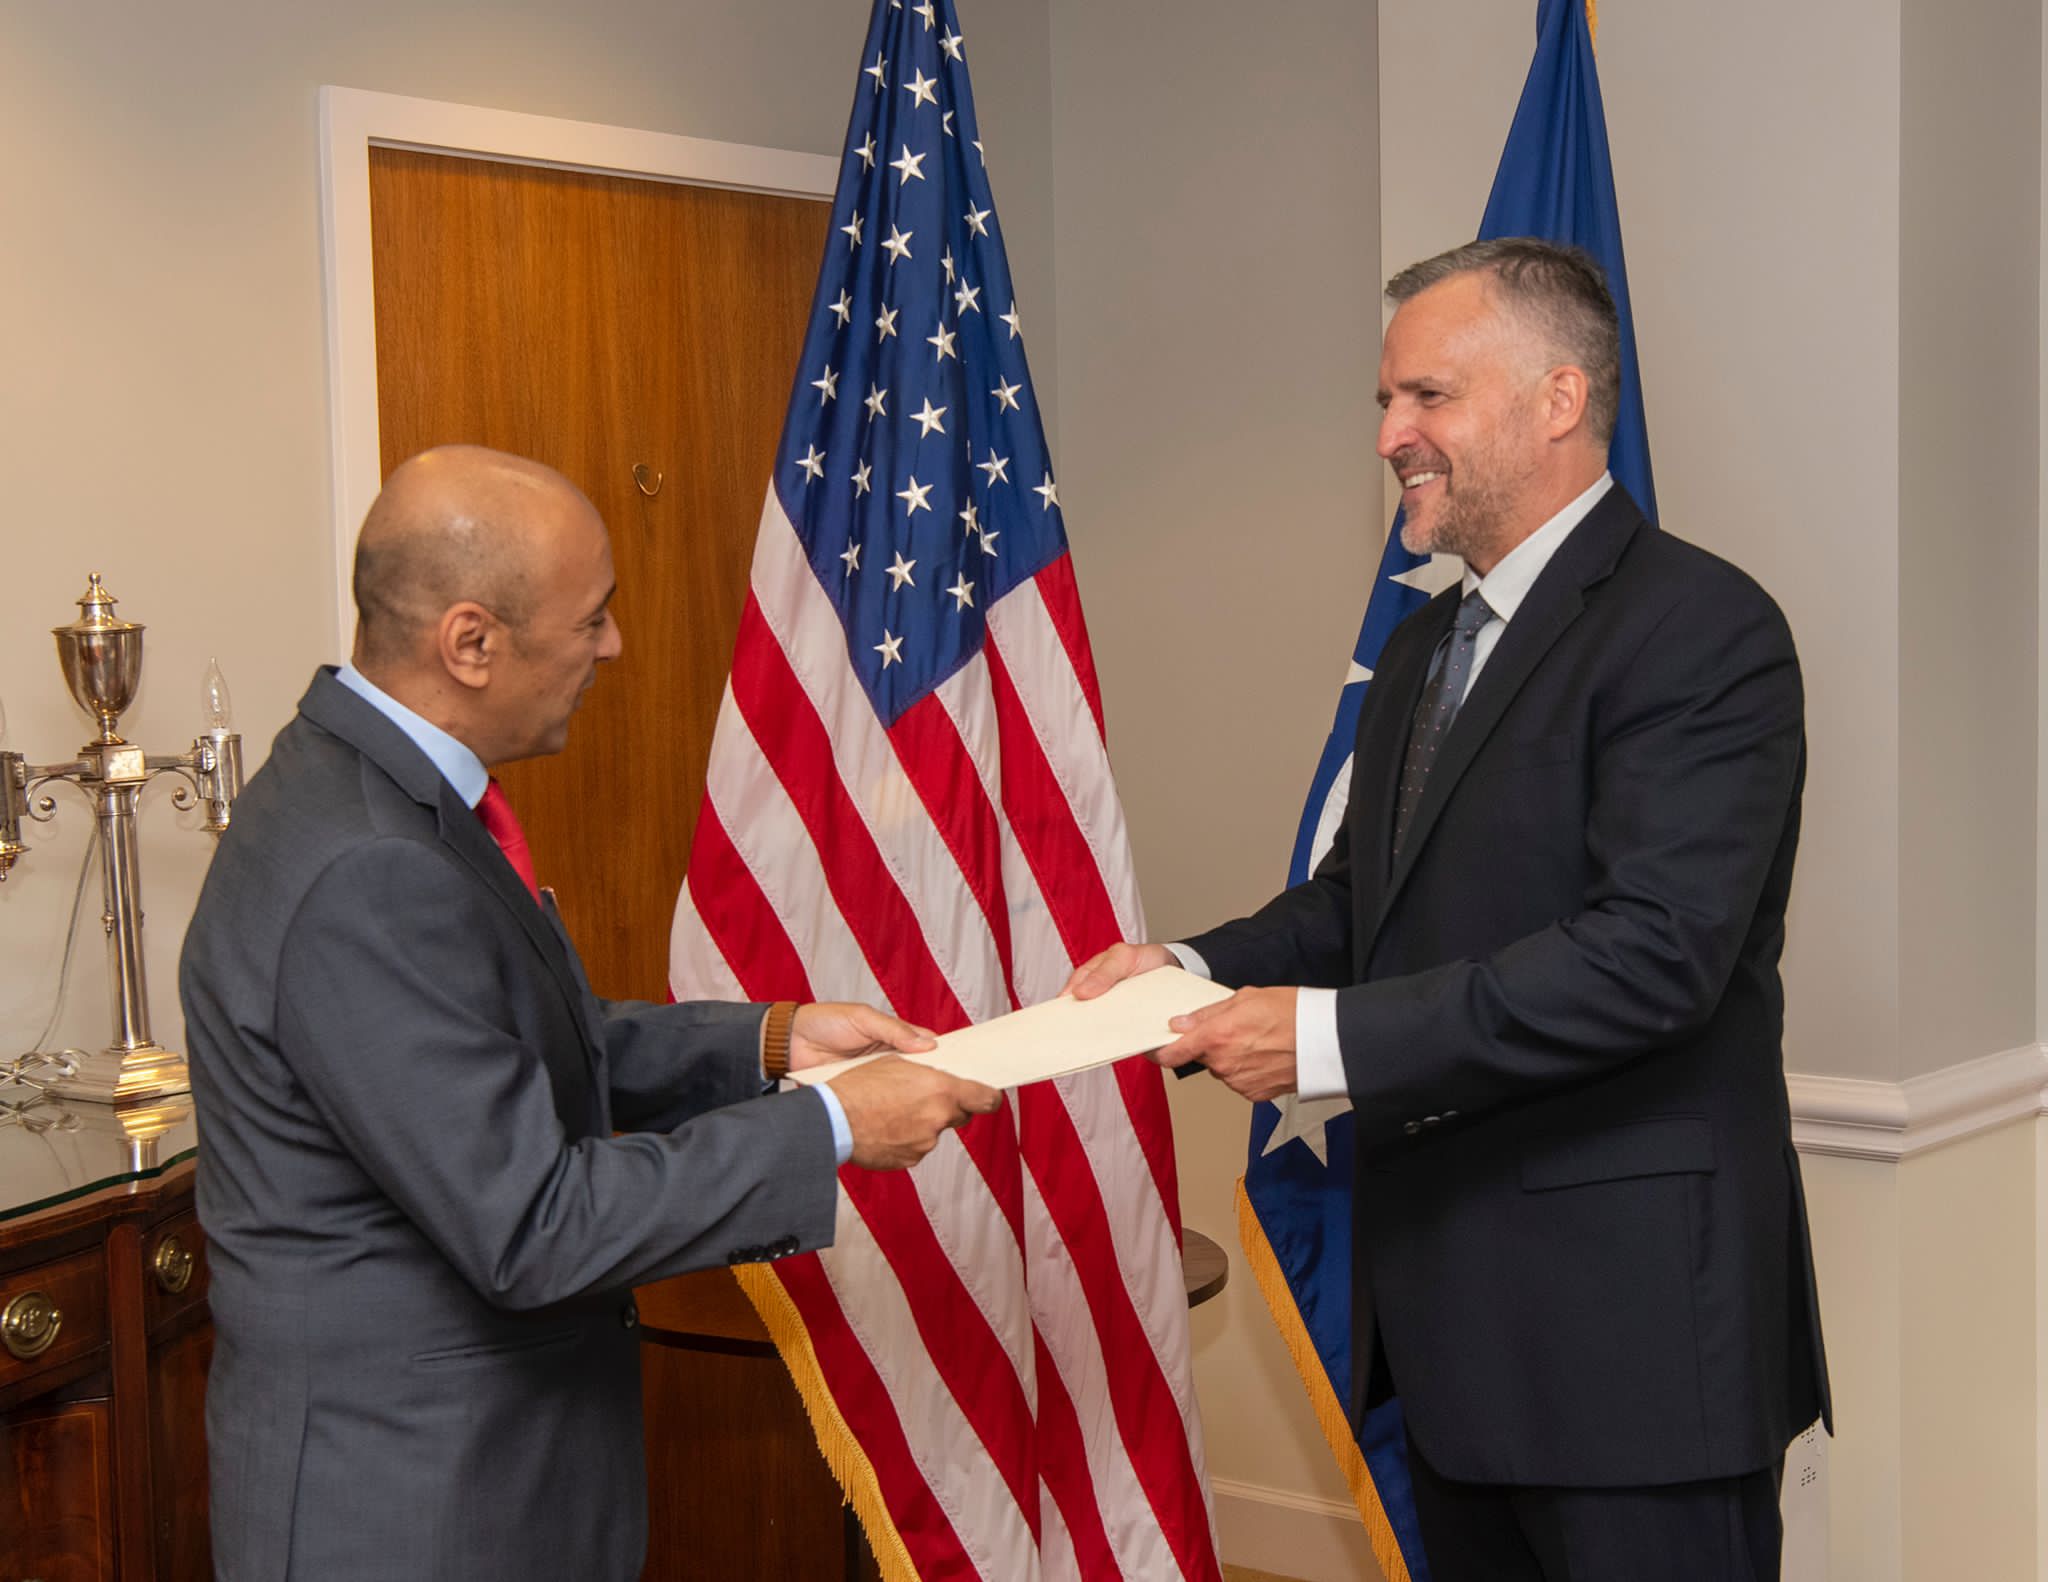 Kuwait Amb. to US Al-Budaiwi presents credentials to State Department's Protocol chief
